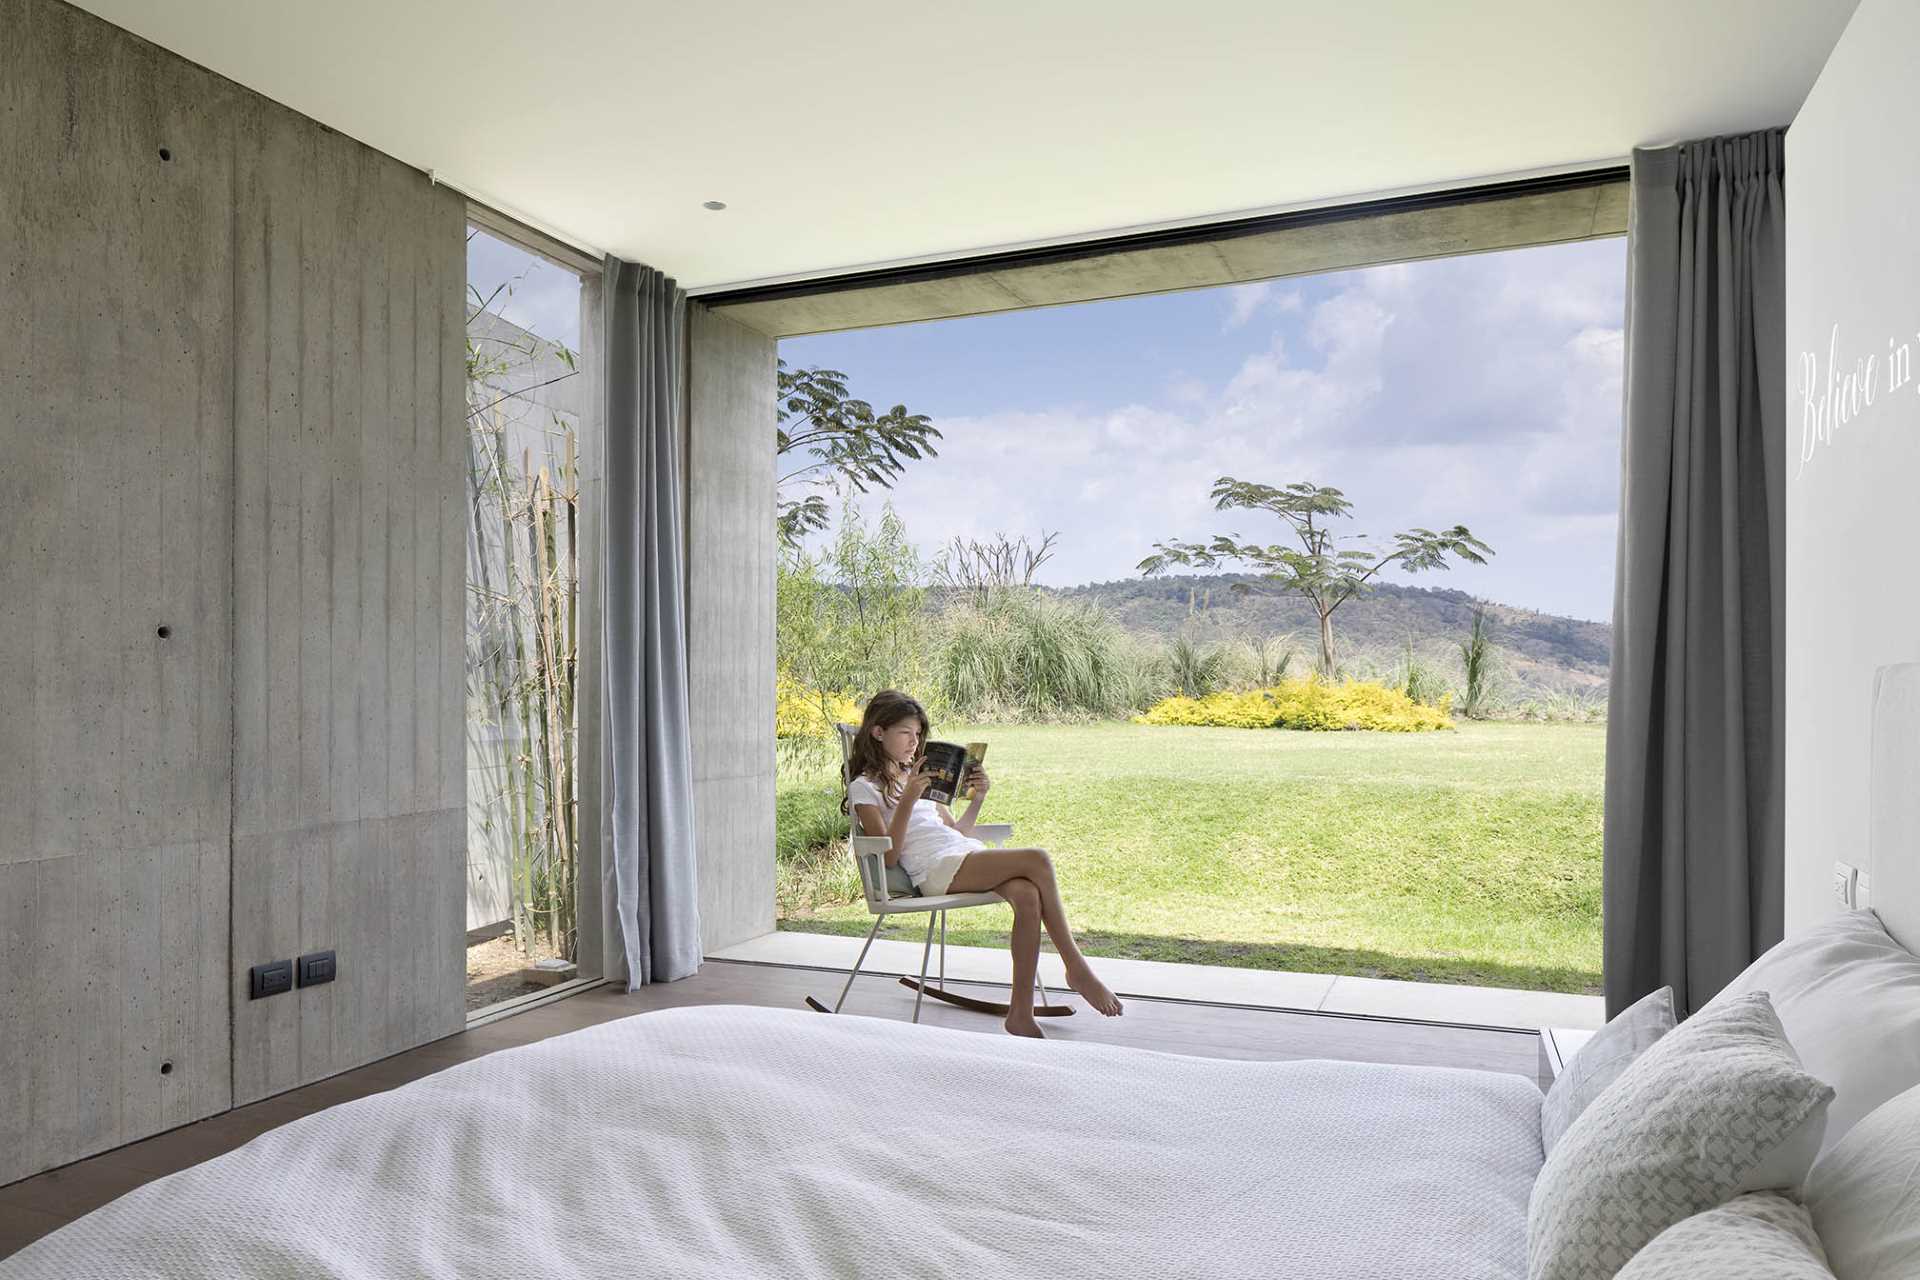 A modern bedroom with sliding doors that open to the outdoors.